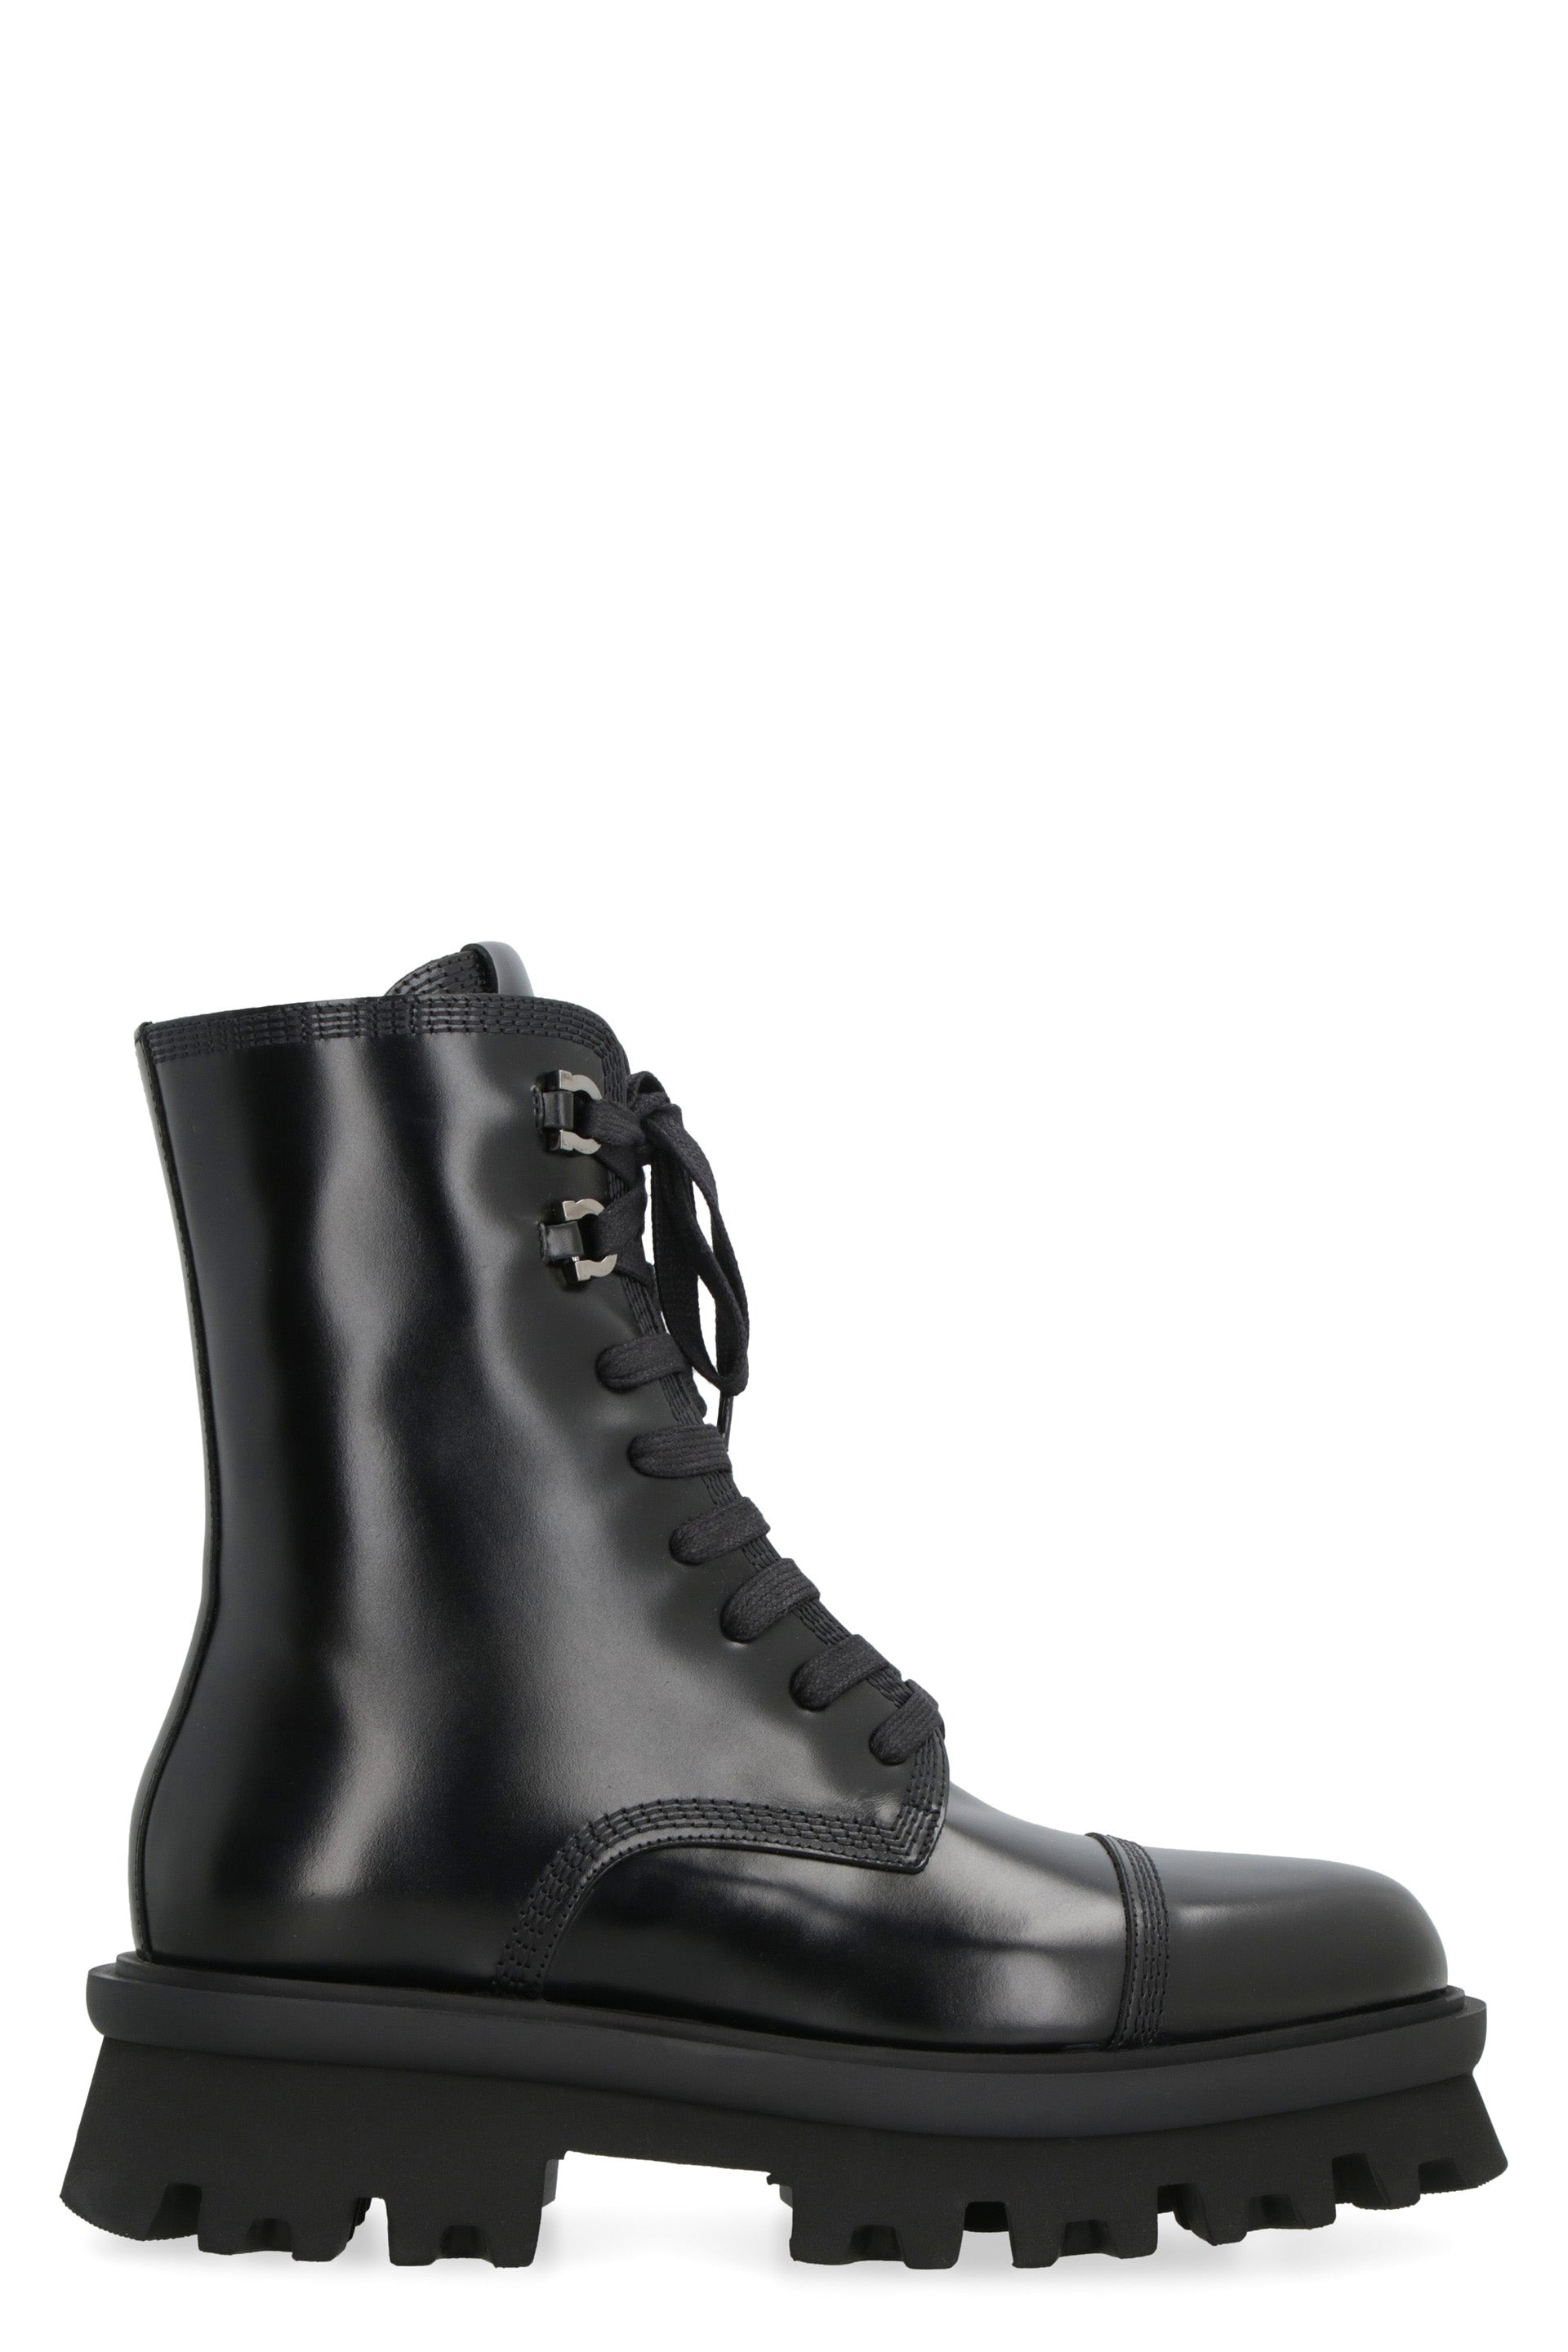 Ferragamo Combat Boots With Brushed Calfskin, Lug Sole And String Closure For Women In Black